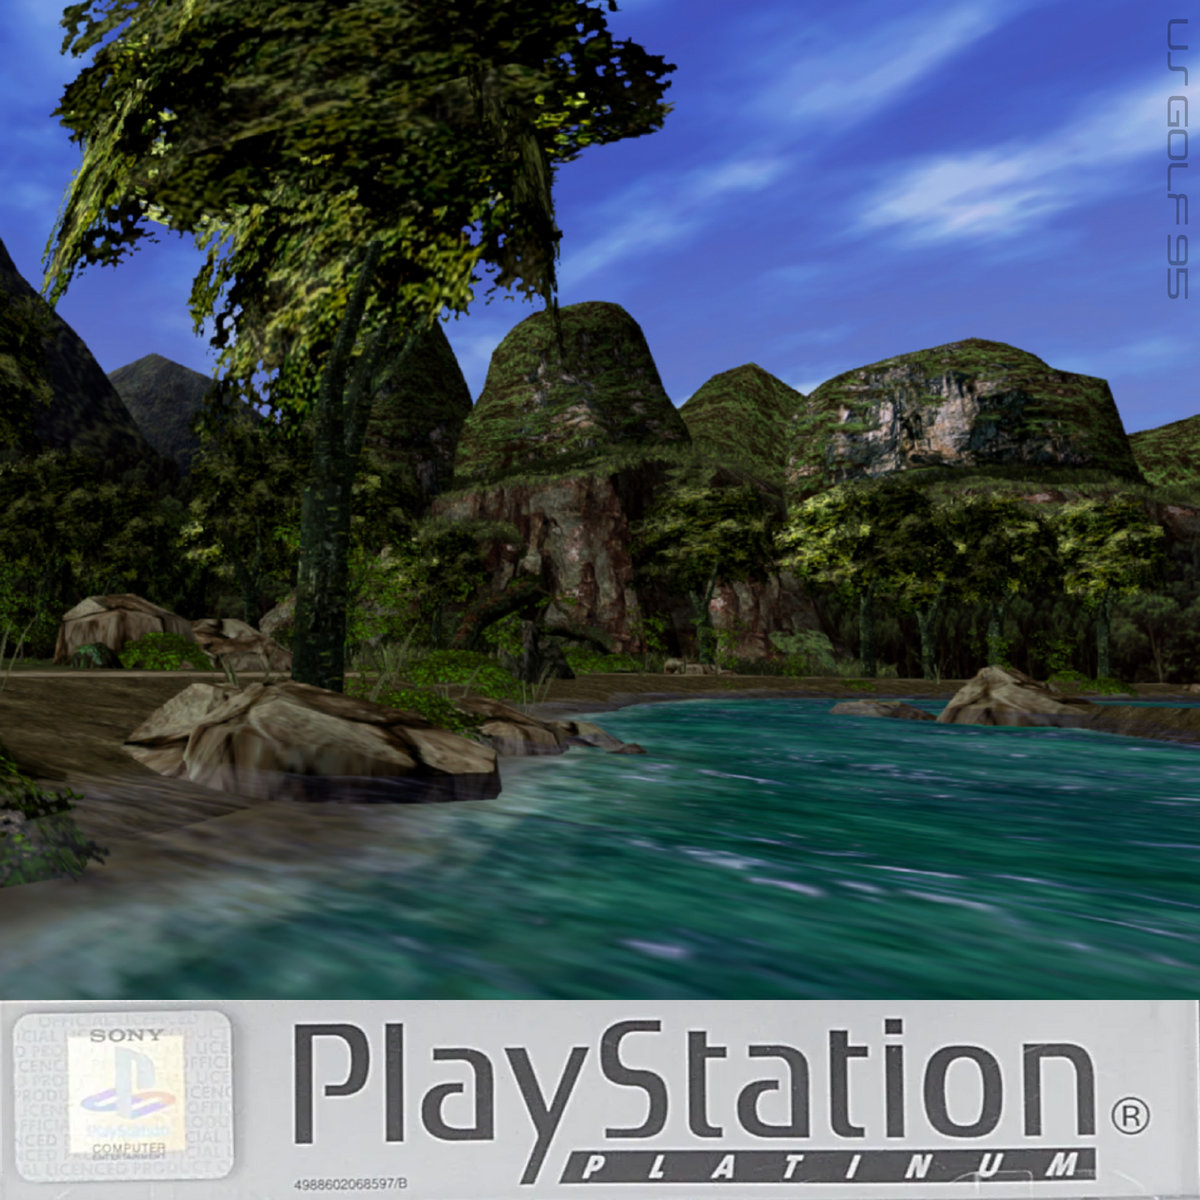 One to one with US Golf 95:Talking [PlayStation] jungle & the future of Vaporwave